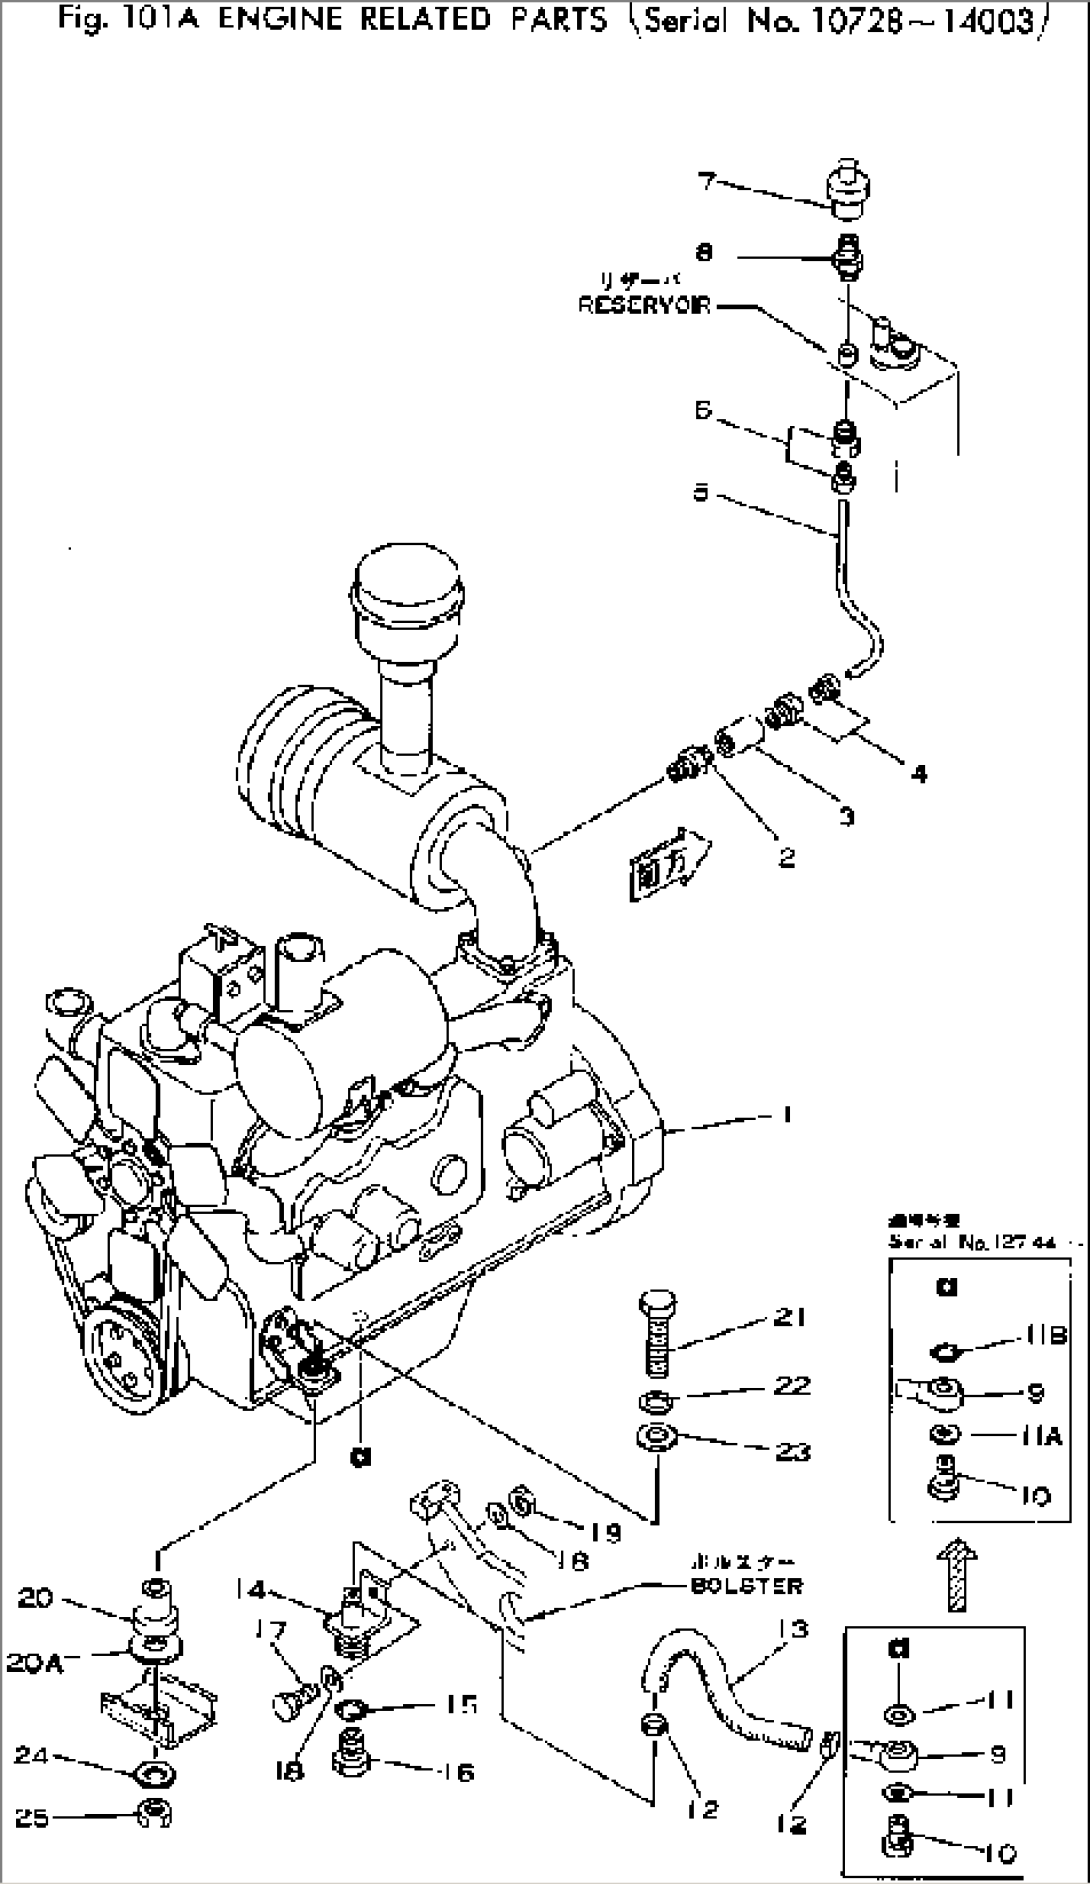 ENGINE RELATED PARTS(#10728-14003)